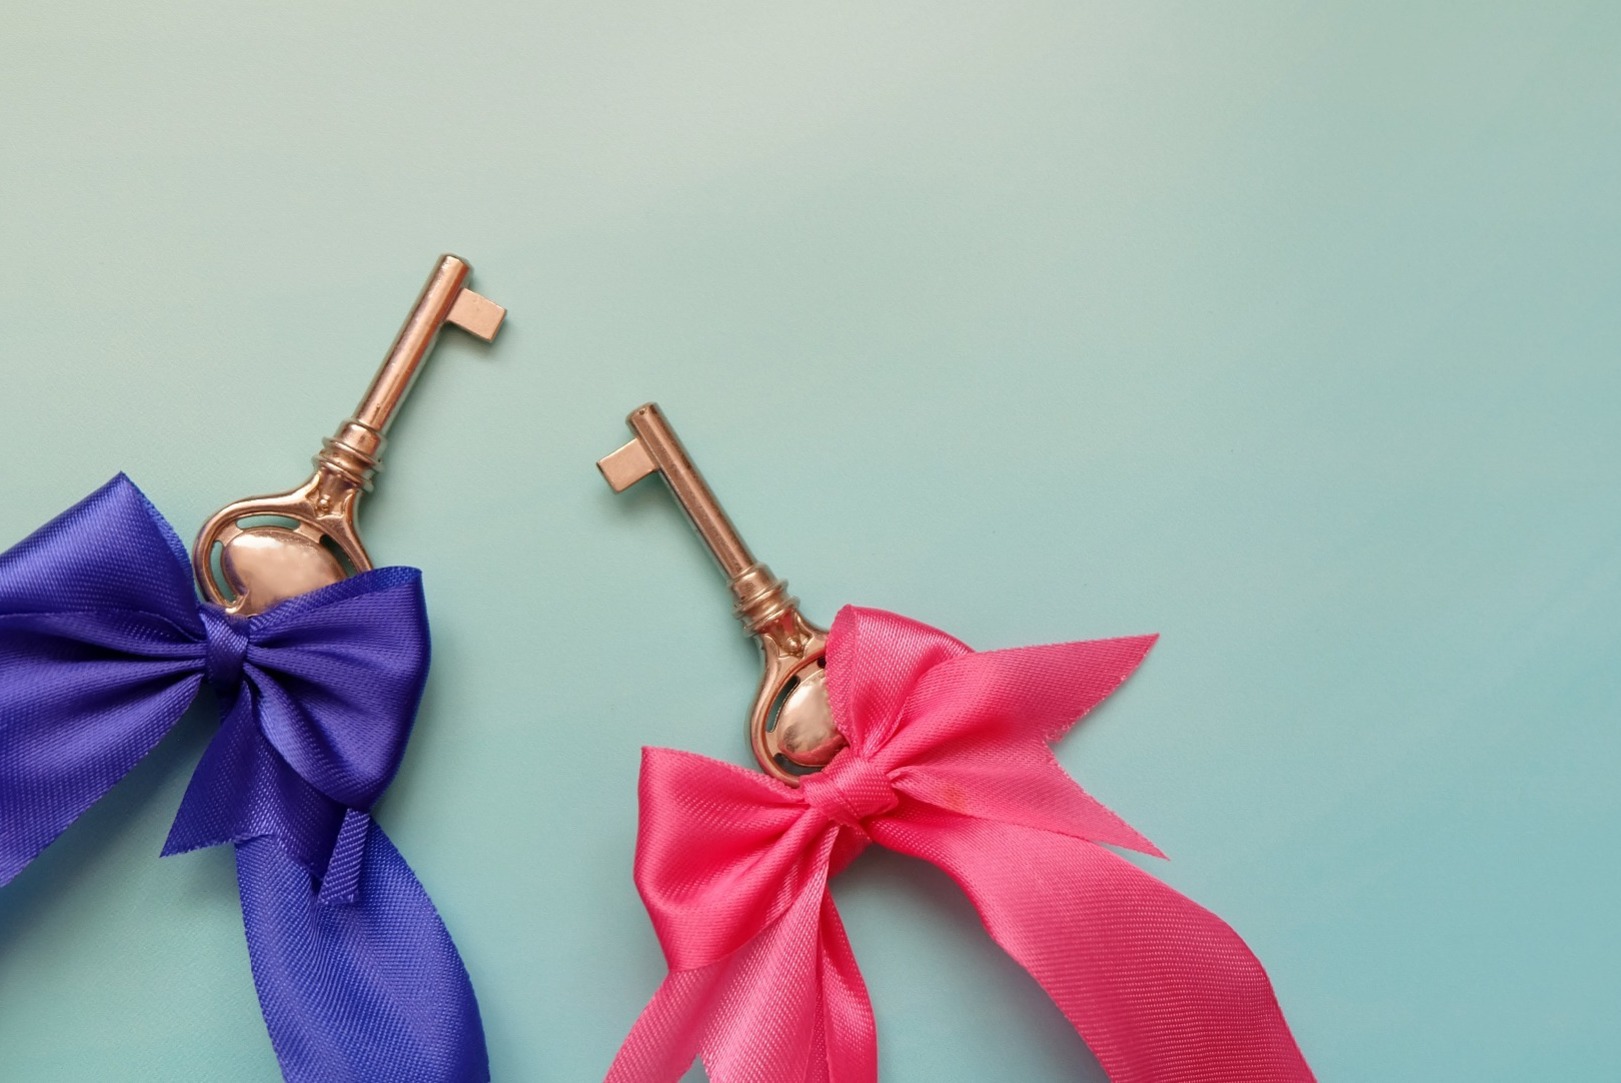 Two keys, tied with different coloured ribbons.